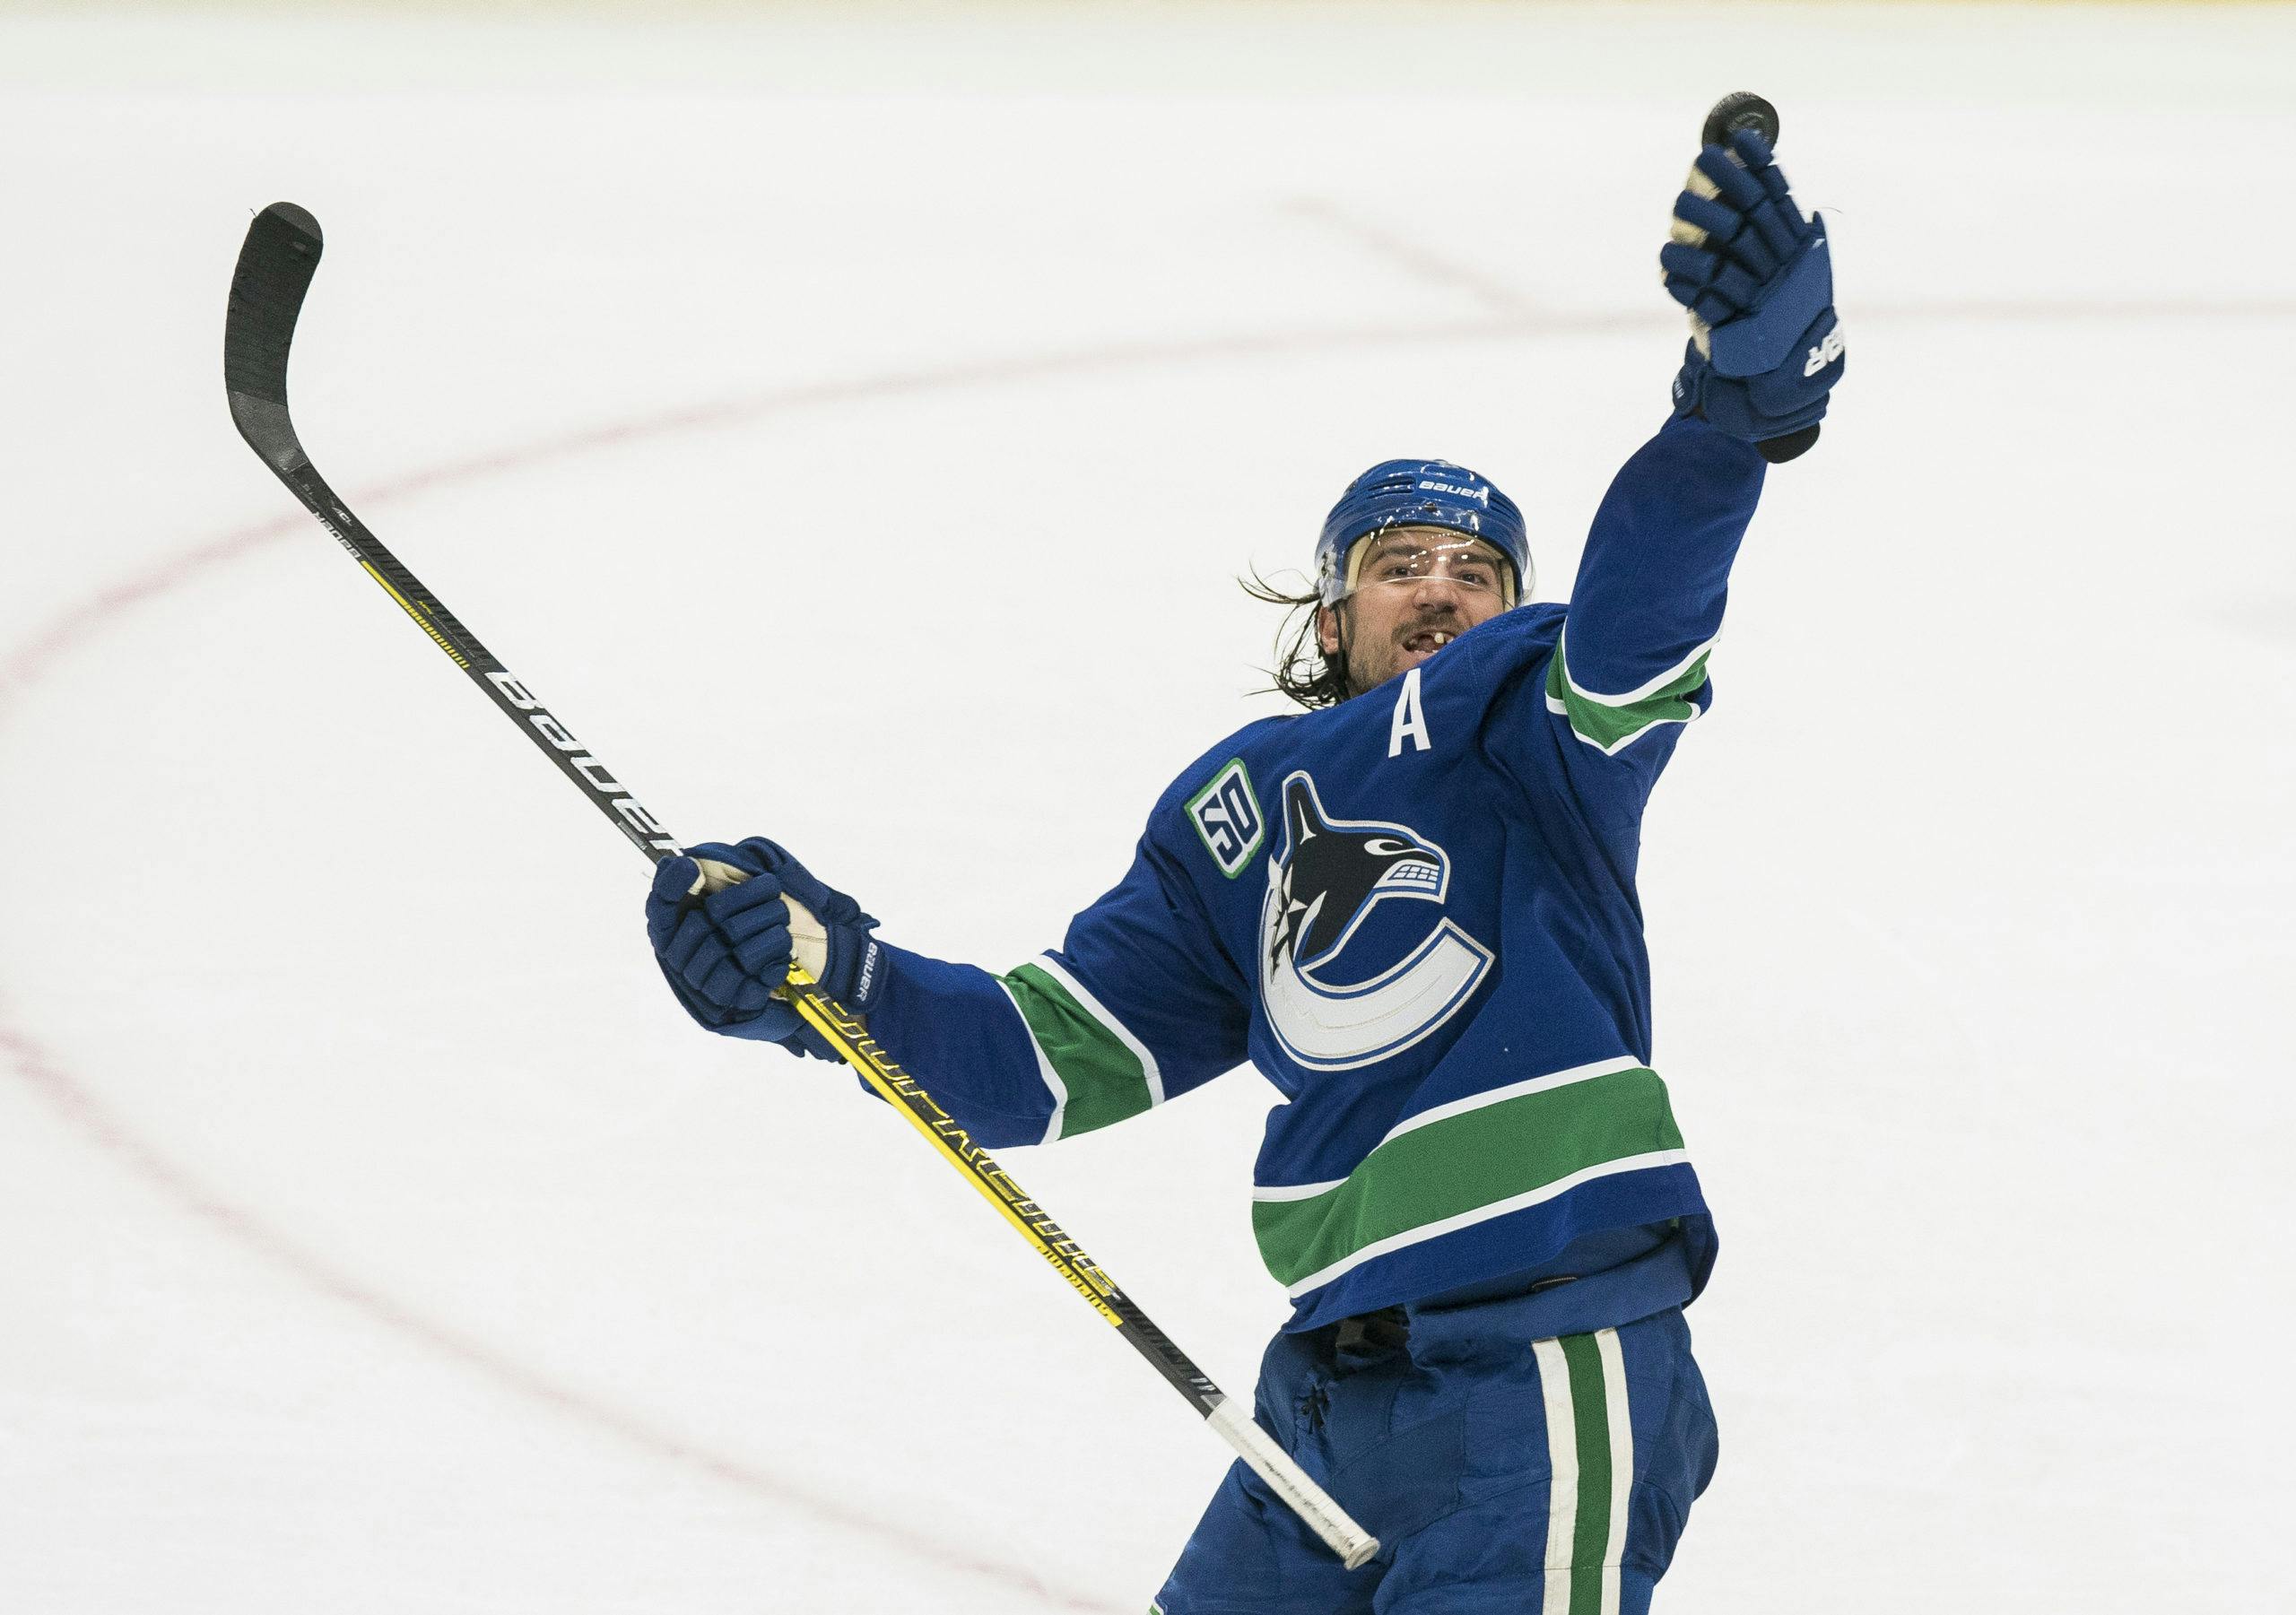 2020 NHL UFA Top 30 Chris Tanev and Brenden Dillon OilersNation